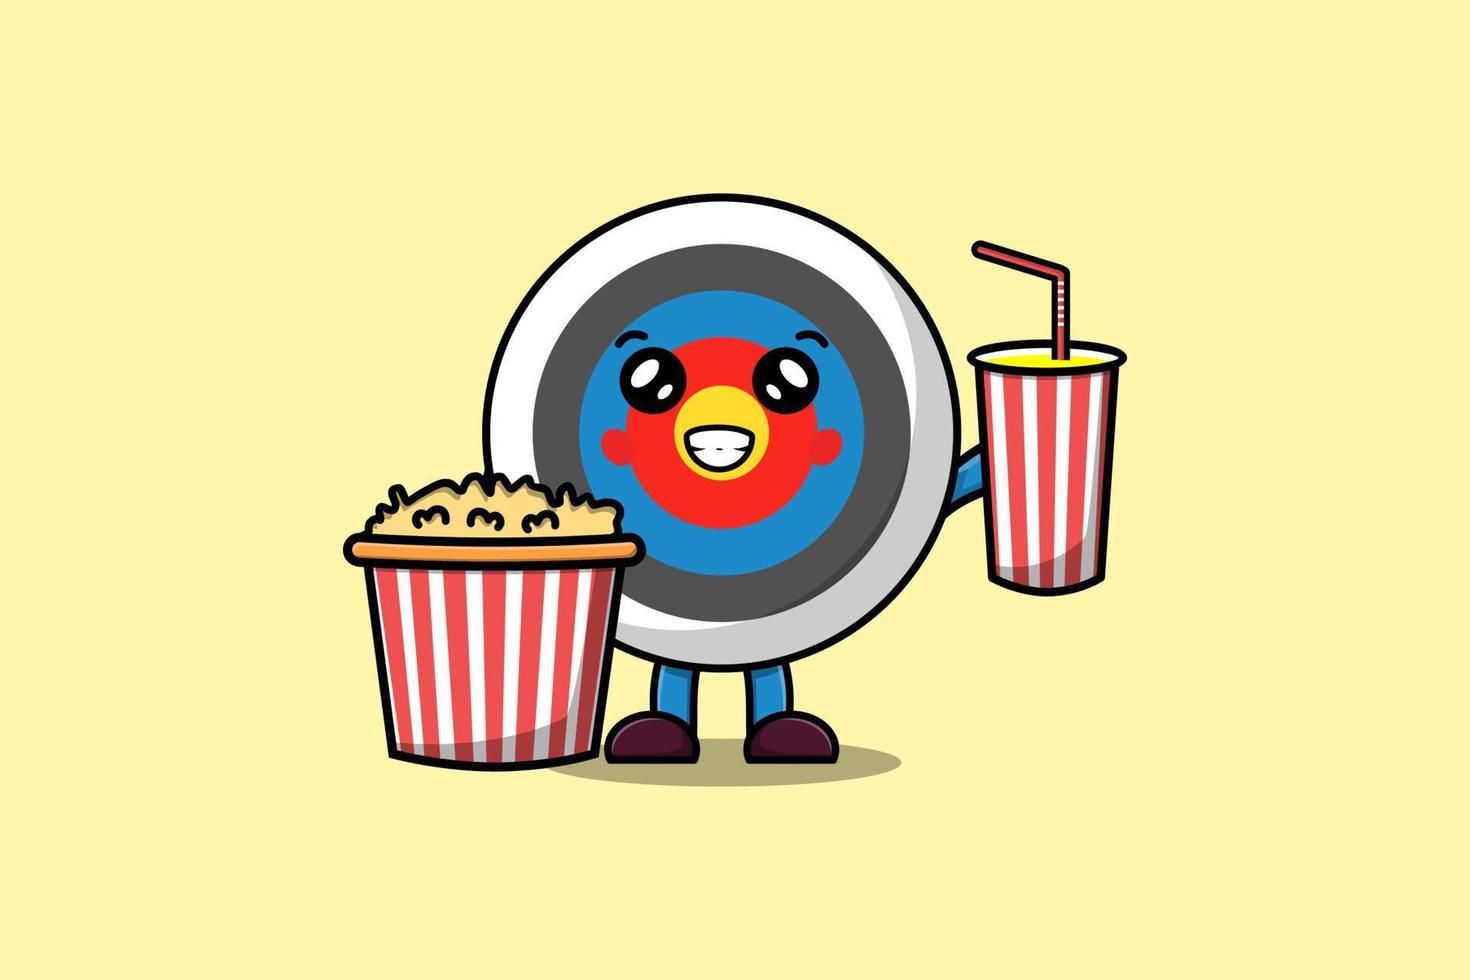 Cute cartoon Archery target with popcorn and drink vector